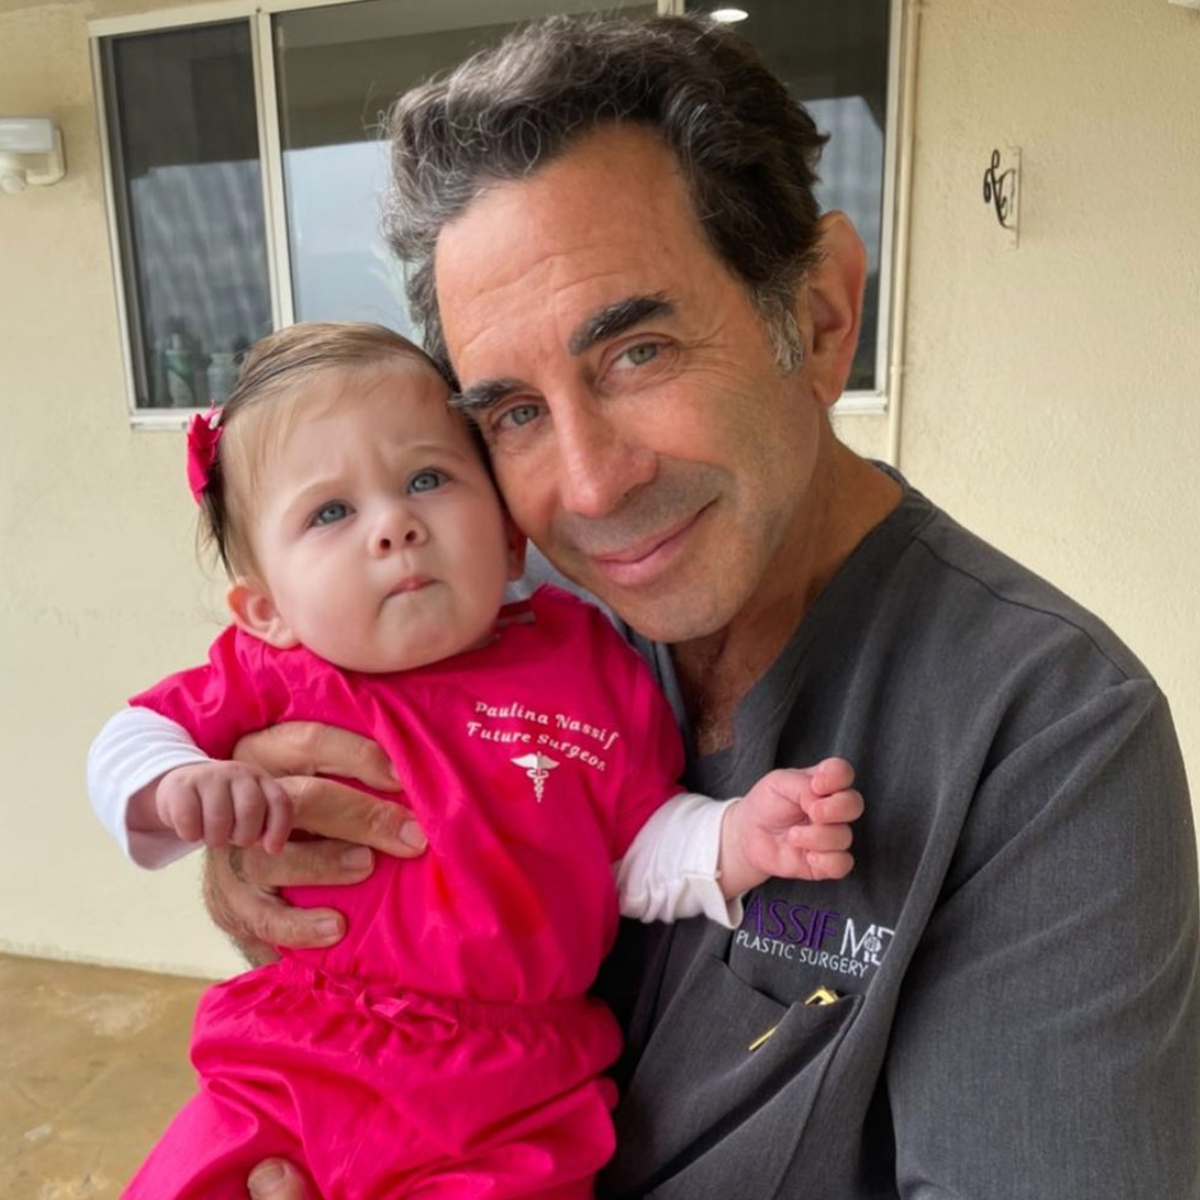 Botched' star Paul Nassif announces brother died 'unexpectedly